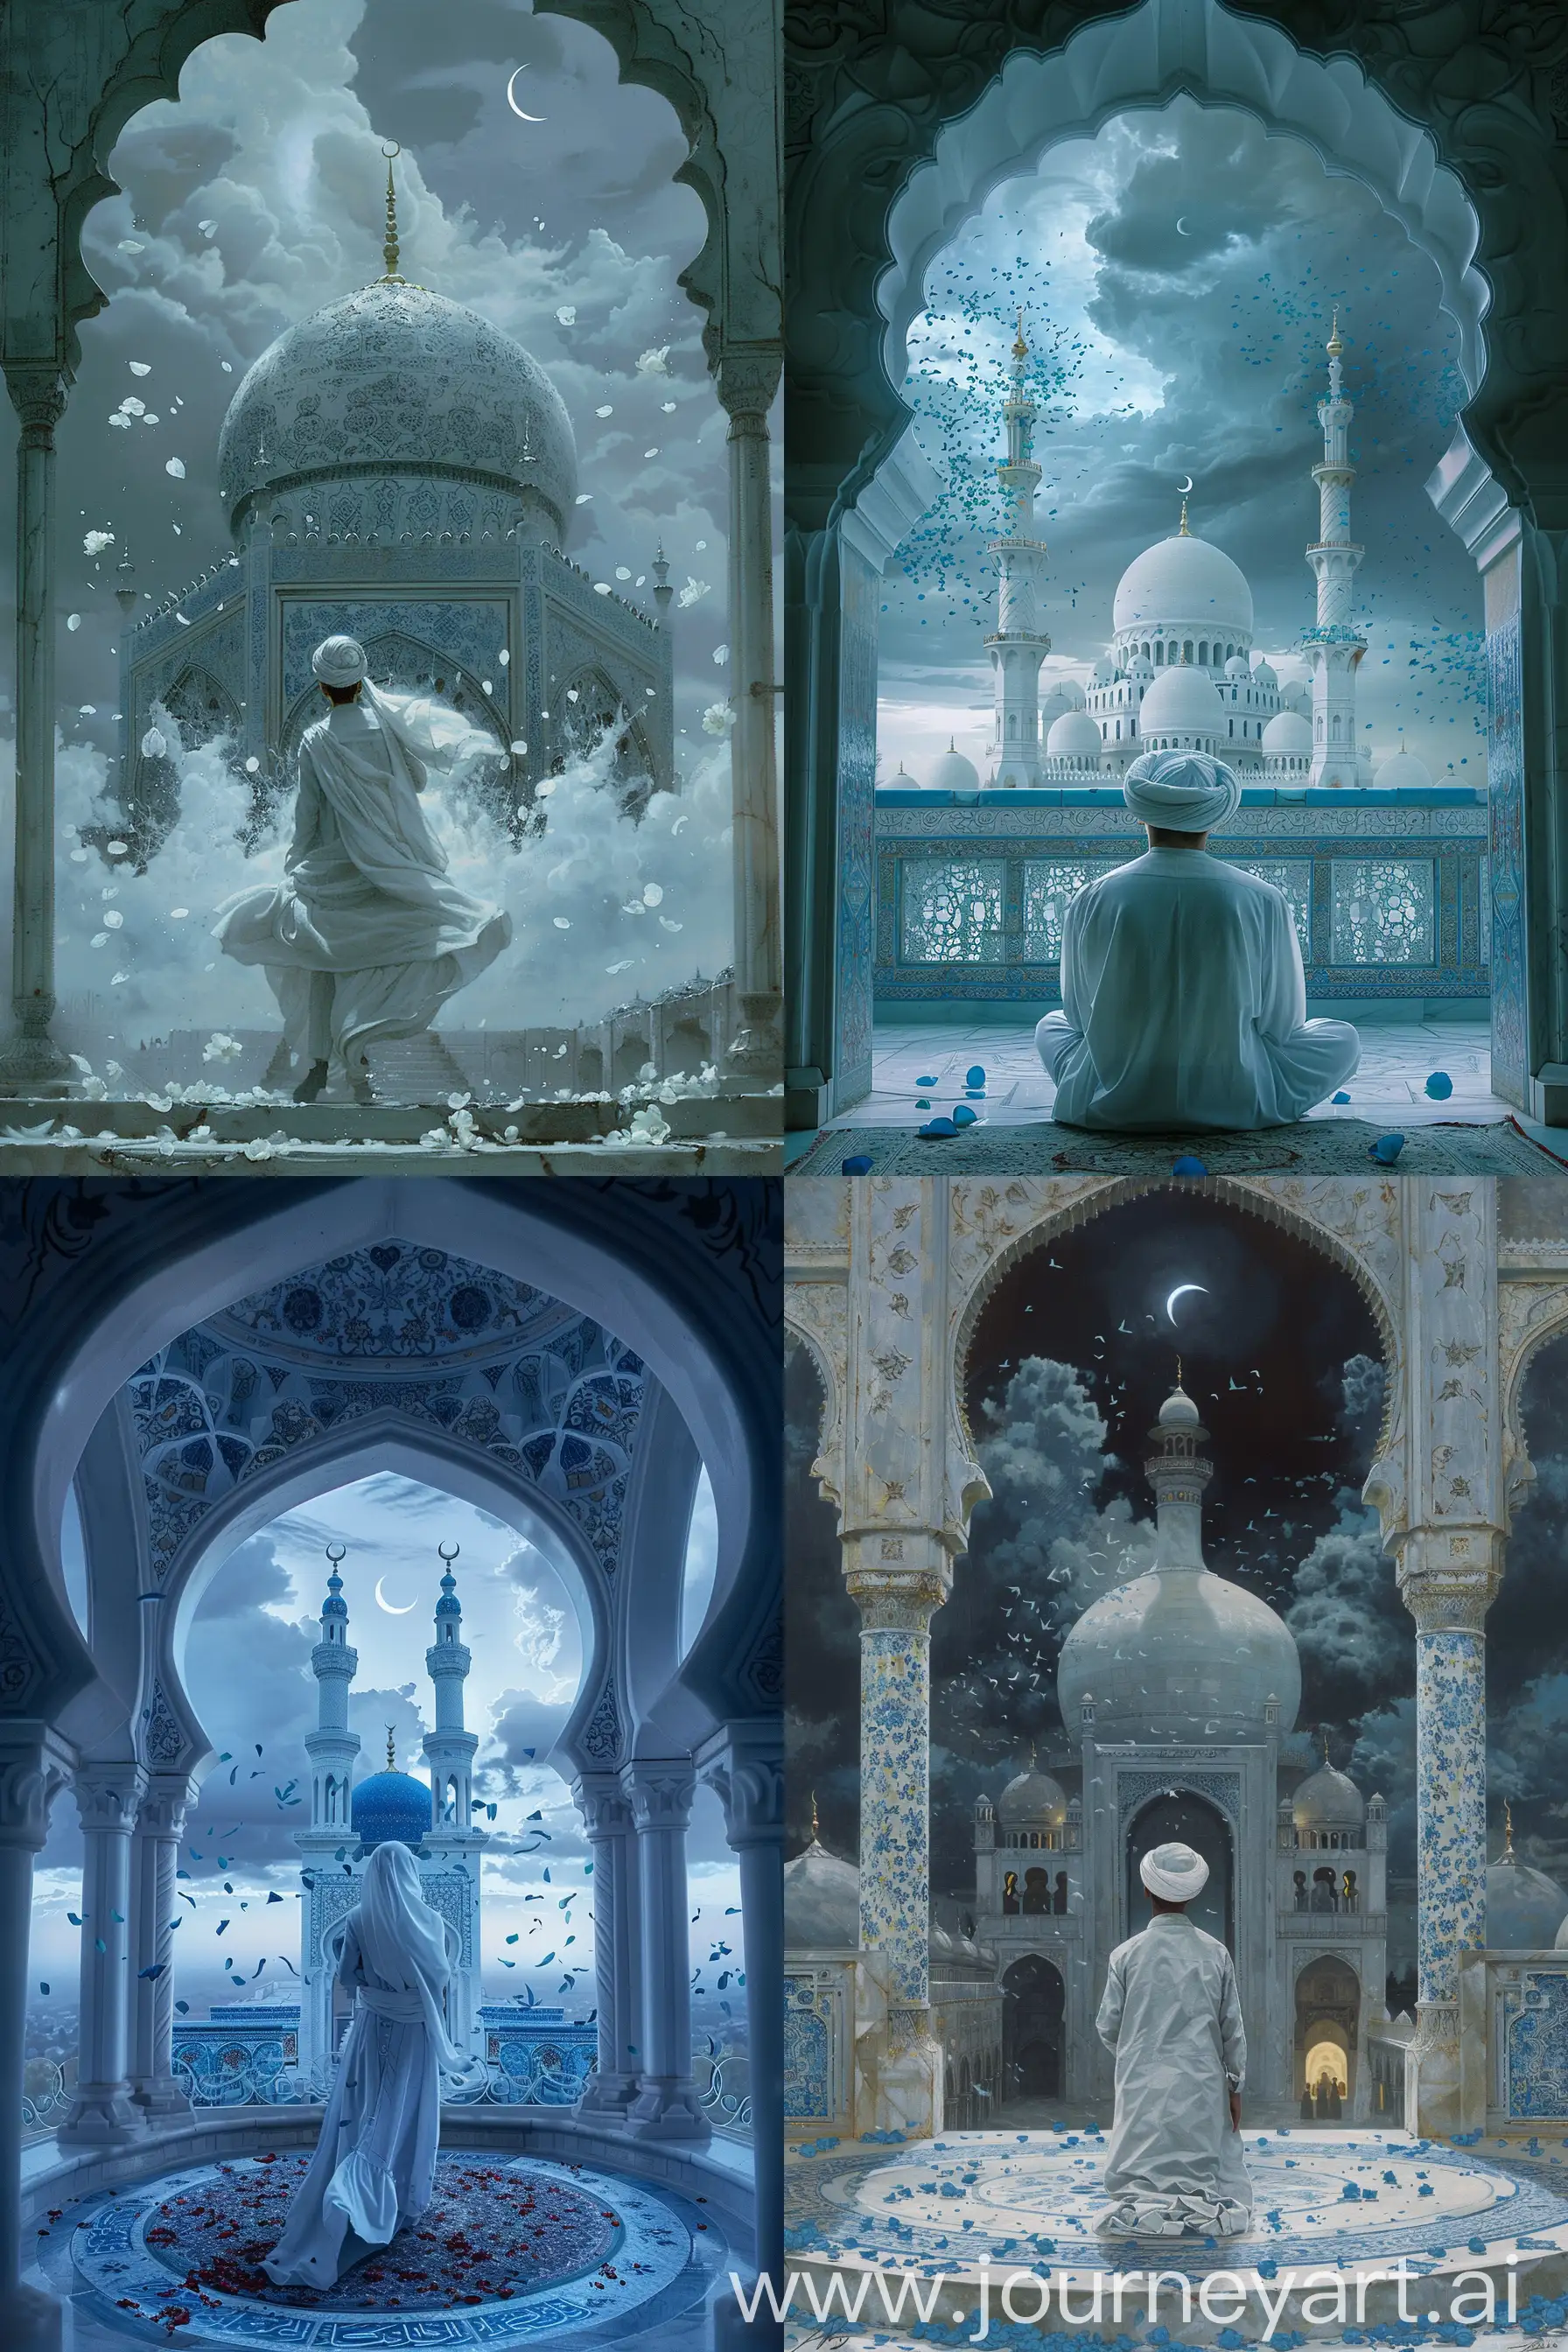 back of a young British whirling dervish performing sufi sema, wearing white clothes and tall cylindrical hat, inside a white porcelain large round balcony surrounded by tall arches decorated with blue persian floral motifs, blue rose petals flying, view of a huge white blue decorated porcelain dome and minaret with golden finial amidst fierce dark greyish clouds in background, dark grey night sky with dark grey clouds, crescent in the sky, winter wheather, blue white grey composition Illustrated painting, in style of Enchanting art of storybook style --ar 2:3 --s 200